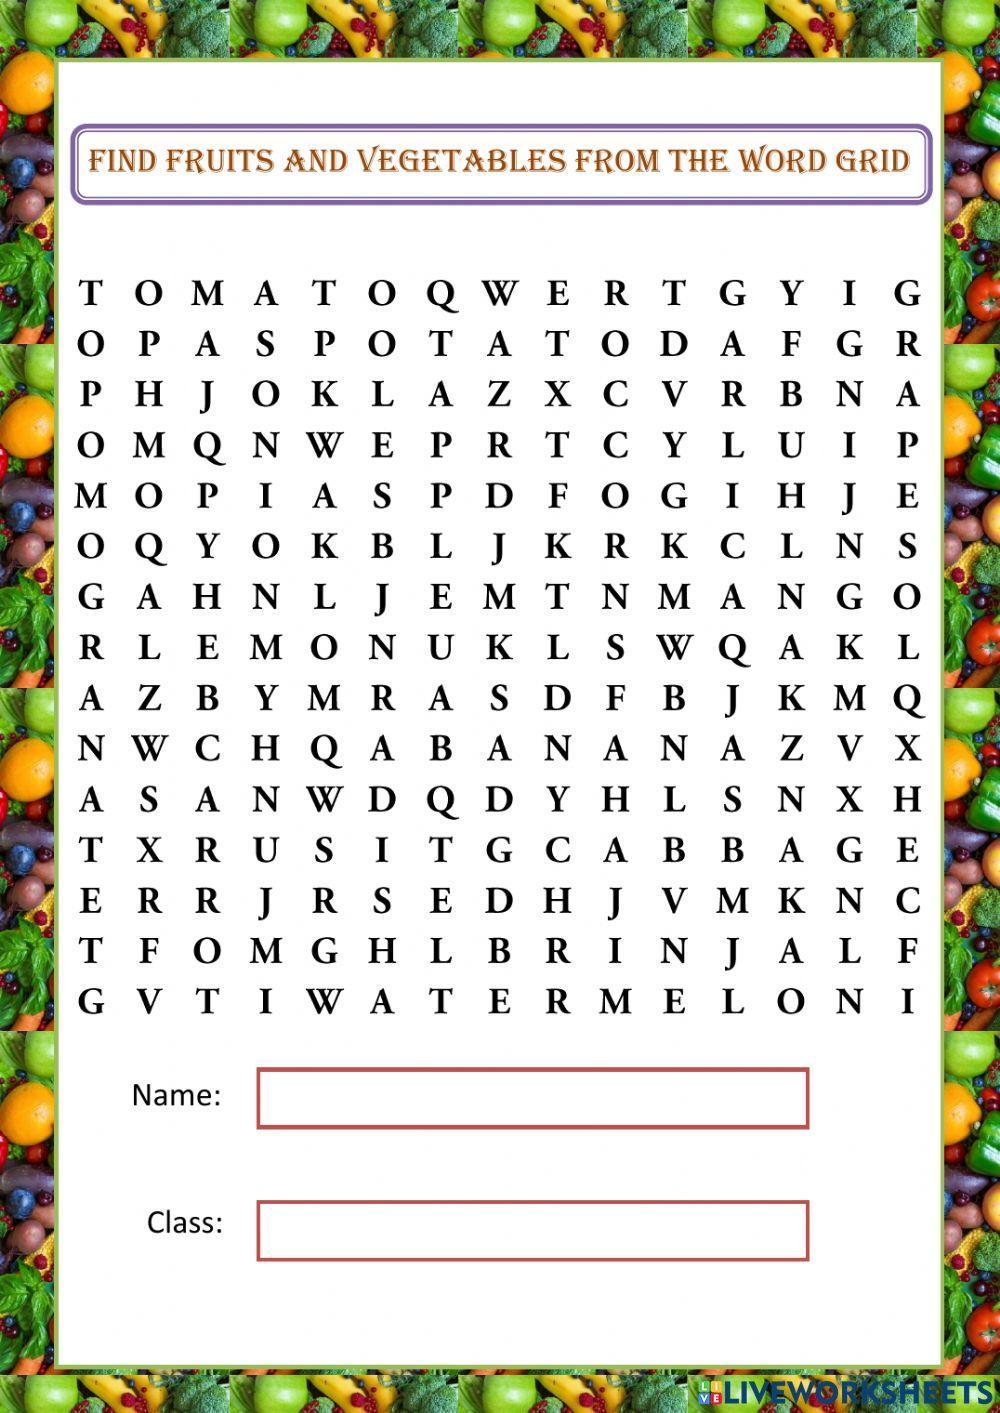 Find fruits and vegetables from the word grid